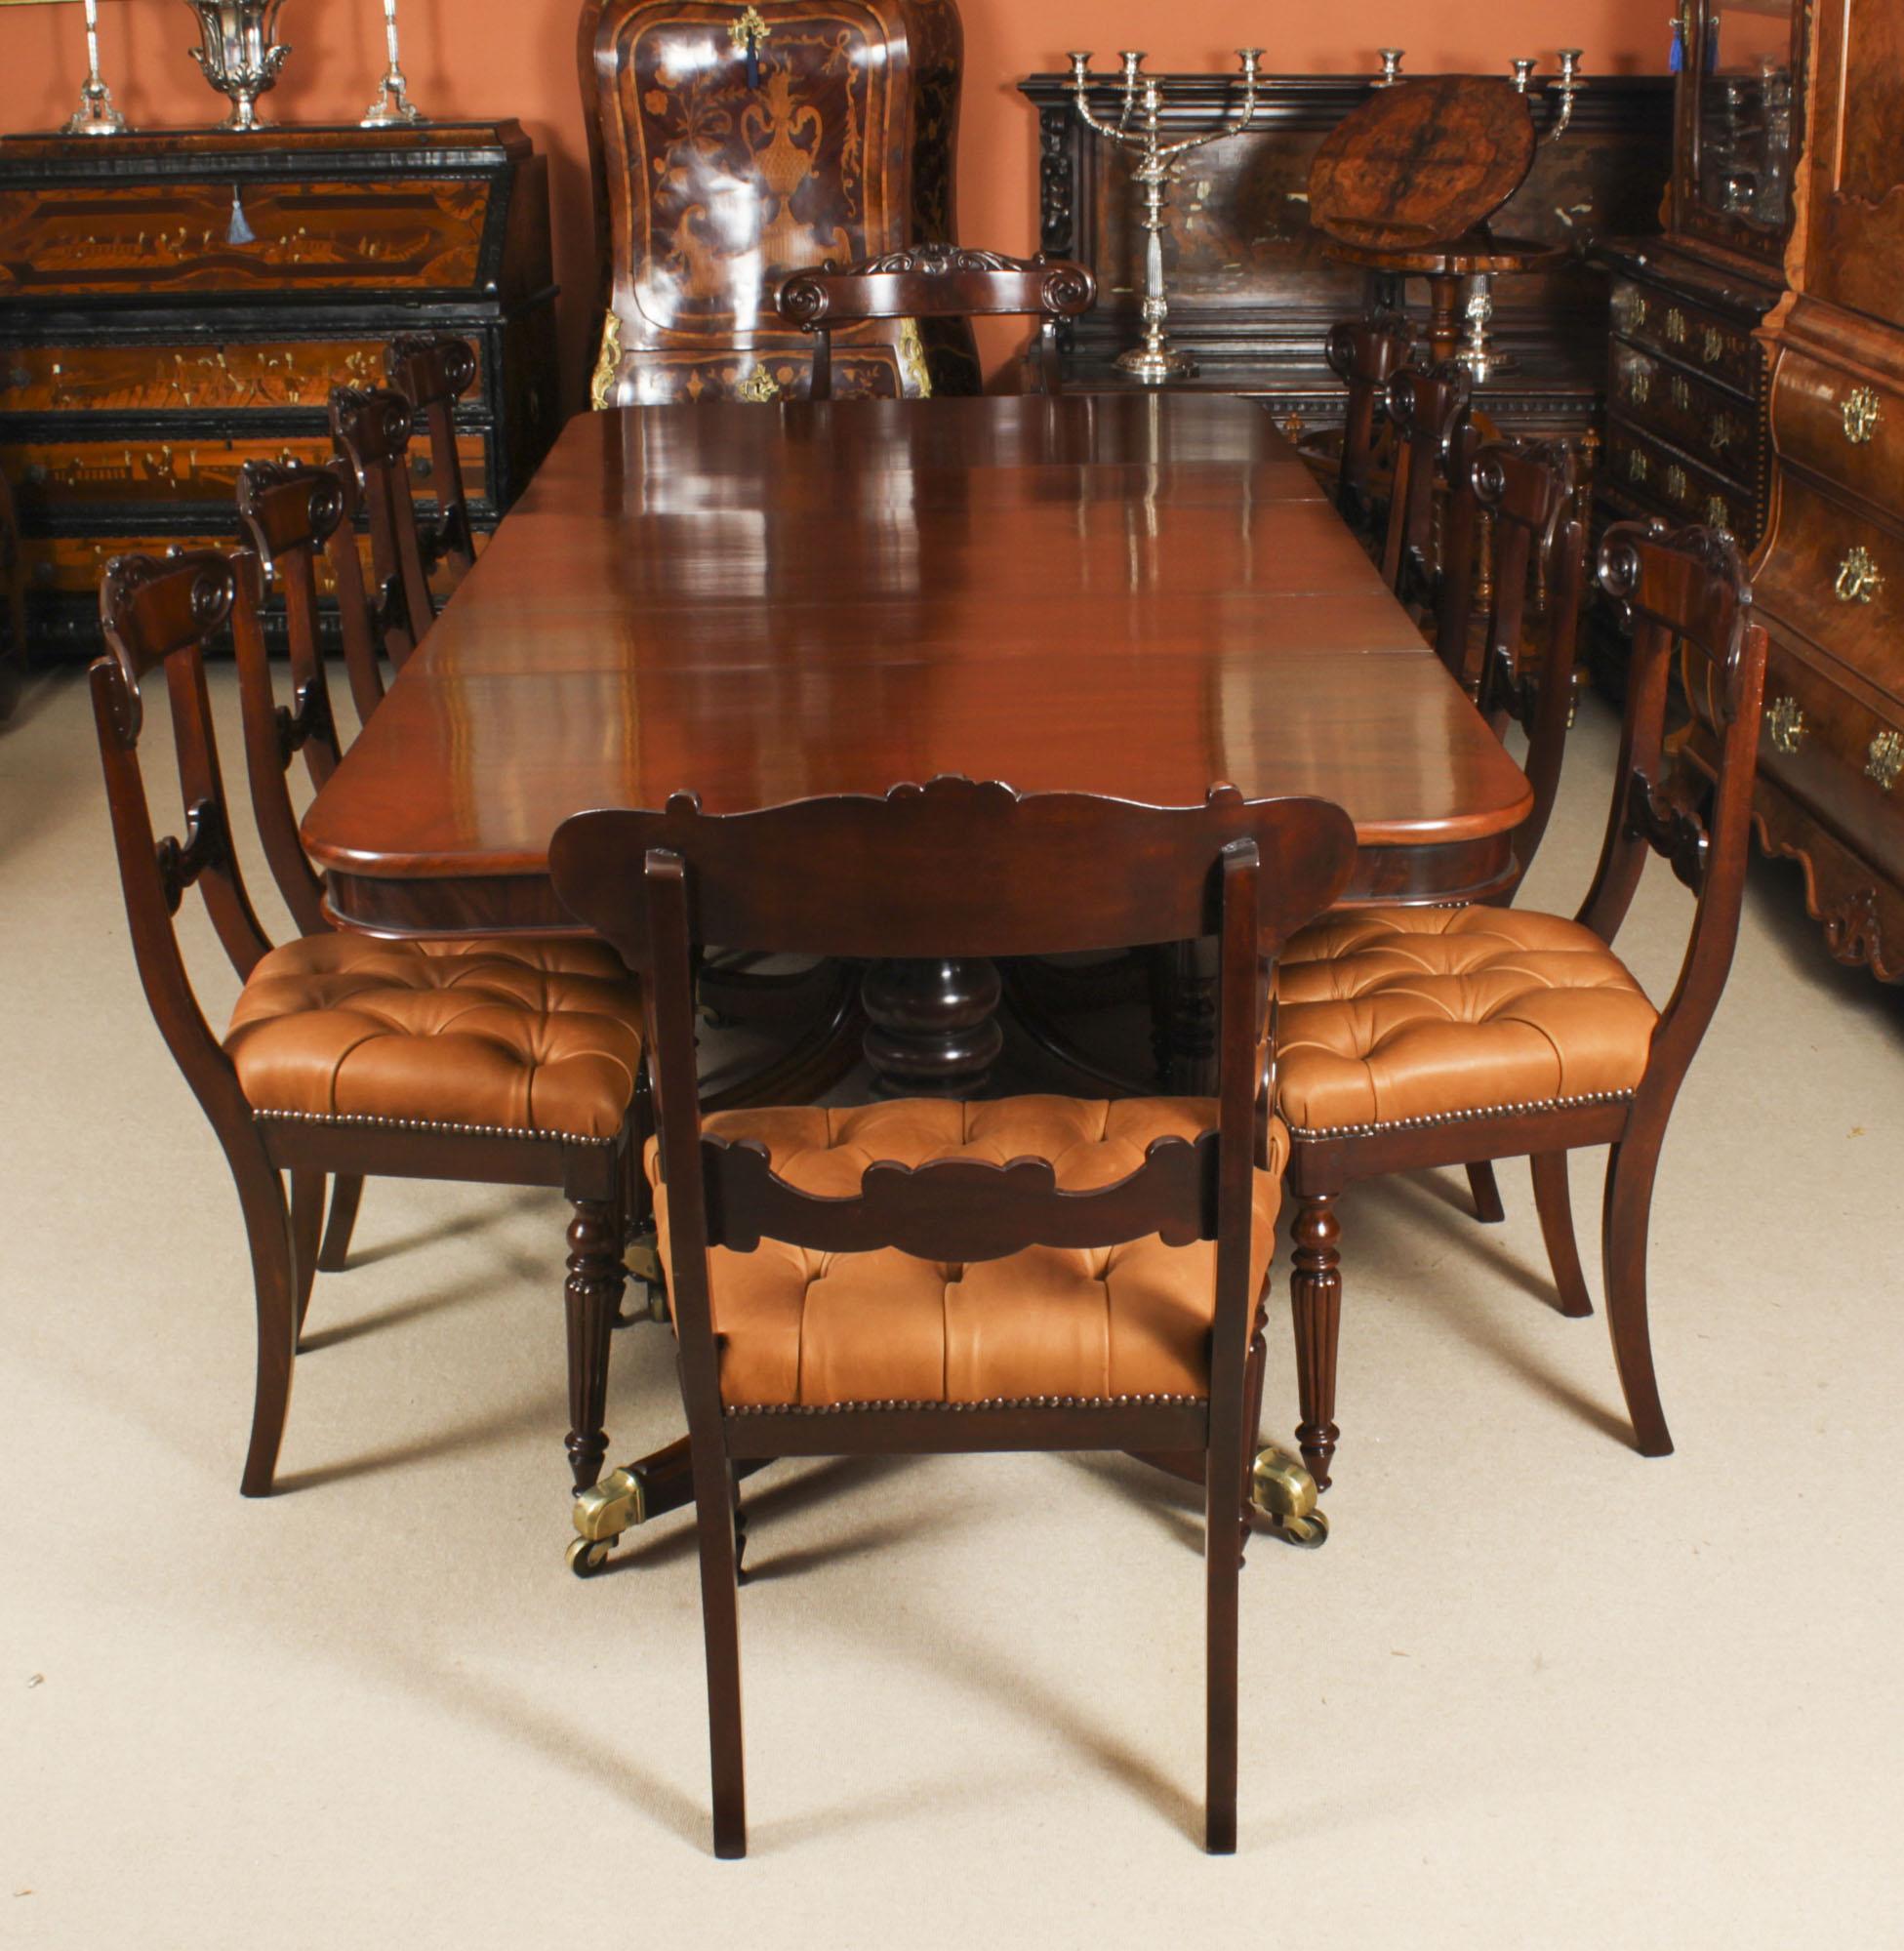 This is a fabulous high quality dining set comprising an antique flame mahogany Regency Period metamorphic triple pillar dining table and a set of ten Regency dining chairs, all circa 1820 in date.

The fabulous high quality antique flame mahogany